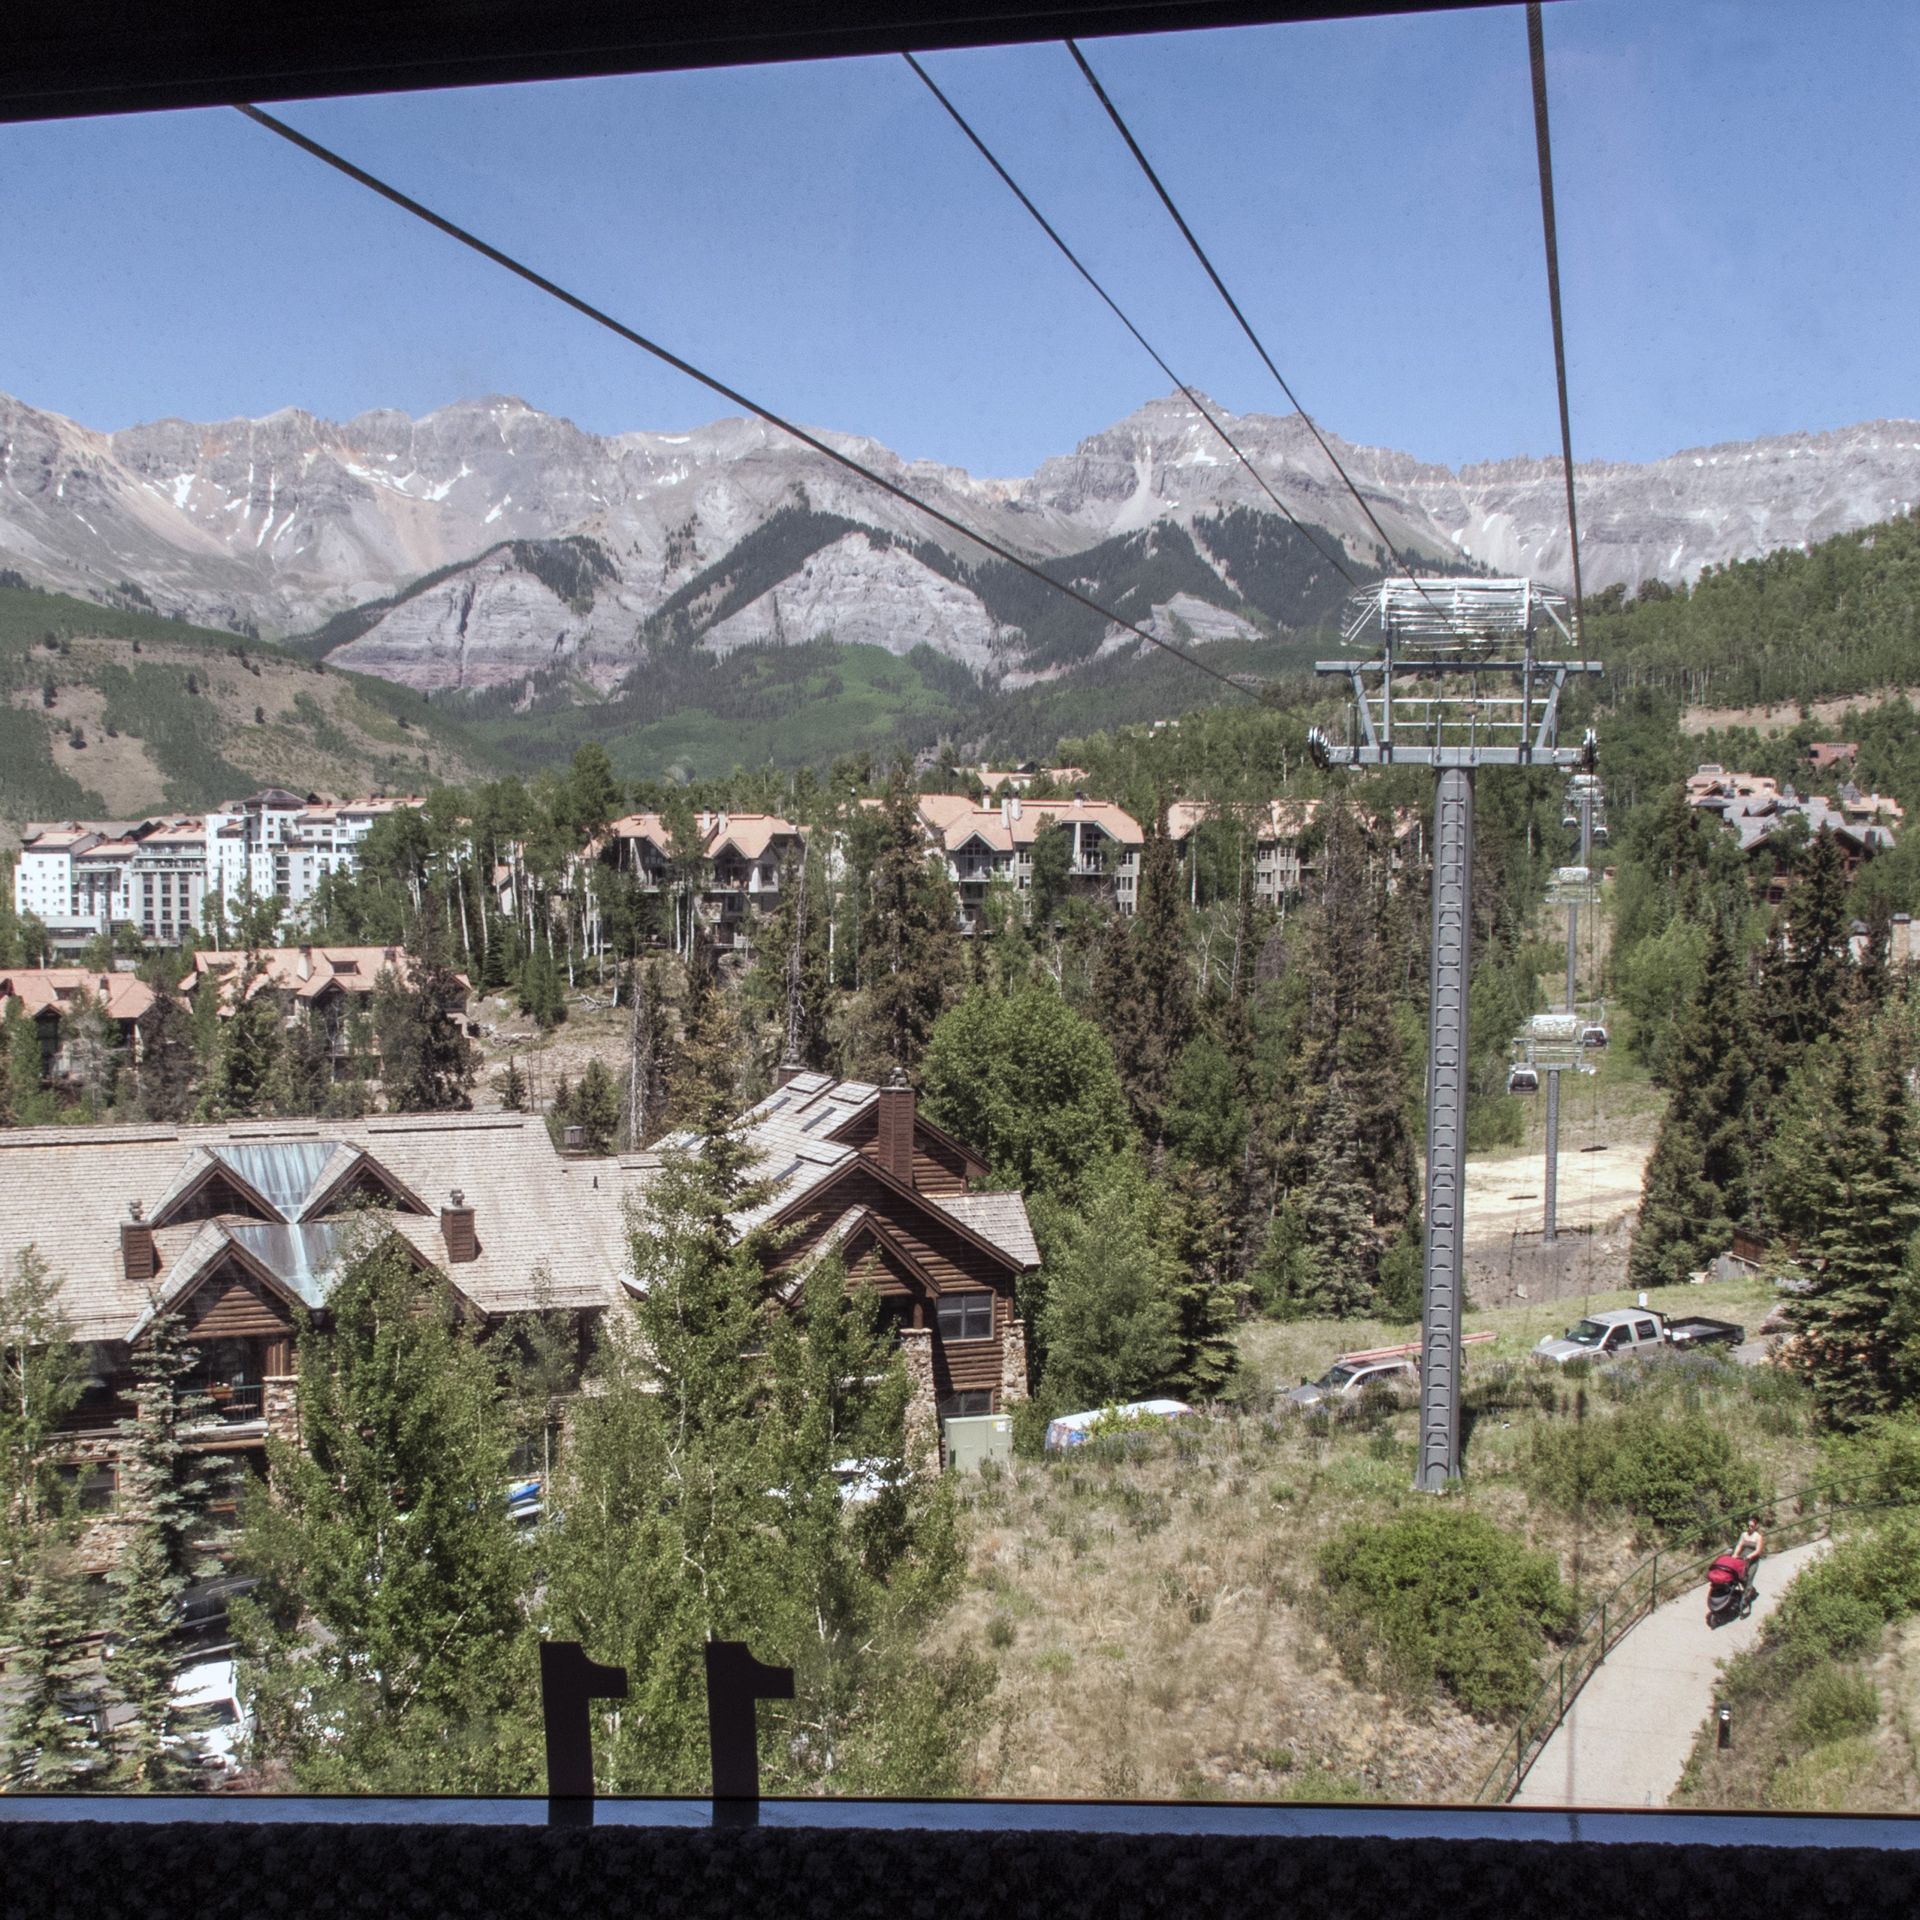 A view from the gondola in Telluride. Photo: Santi Visalli/Getty Images